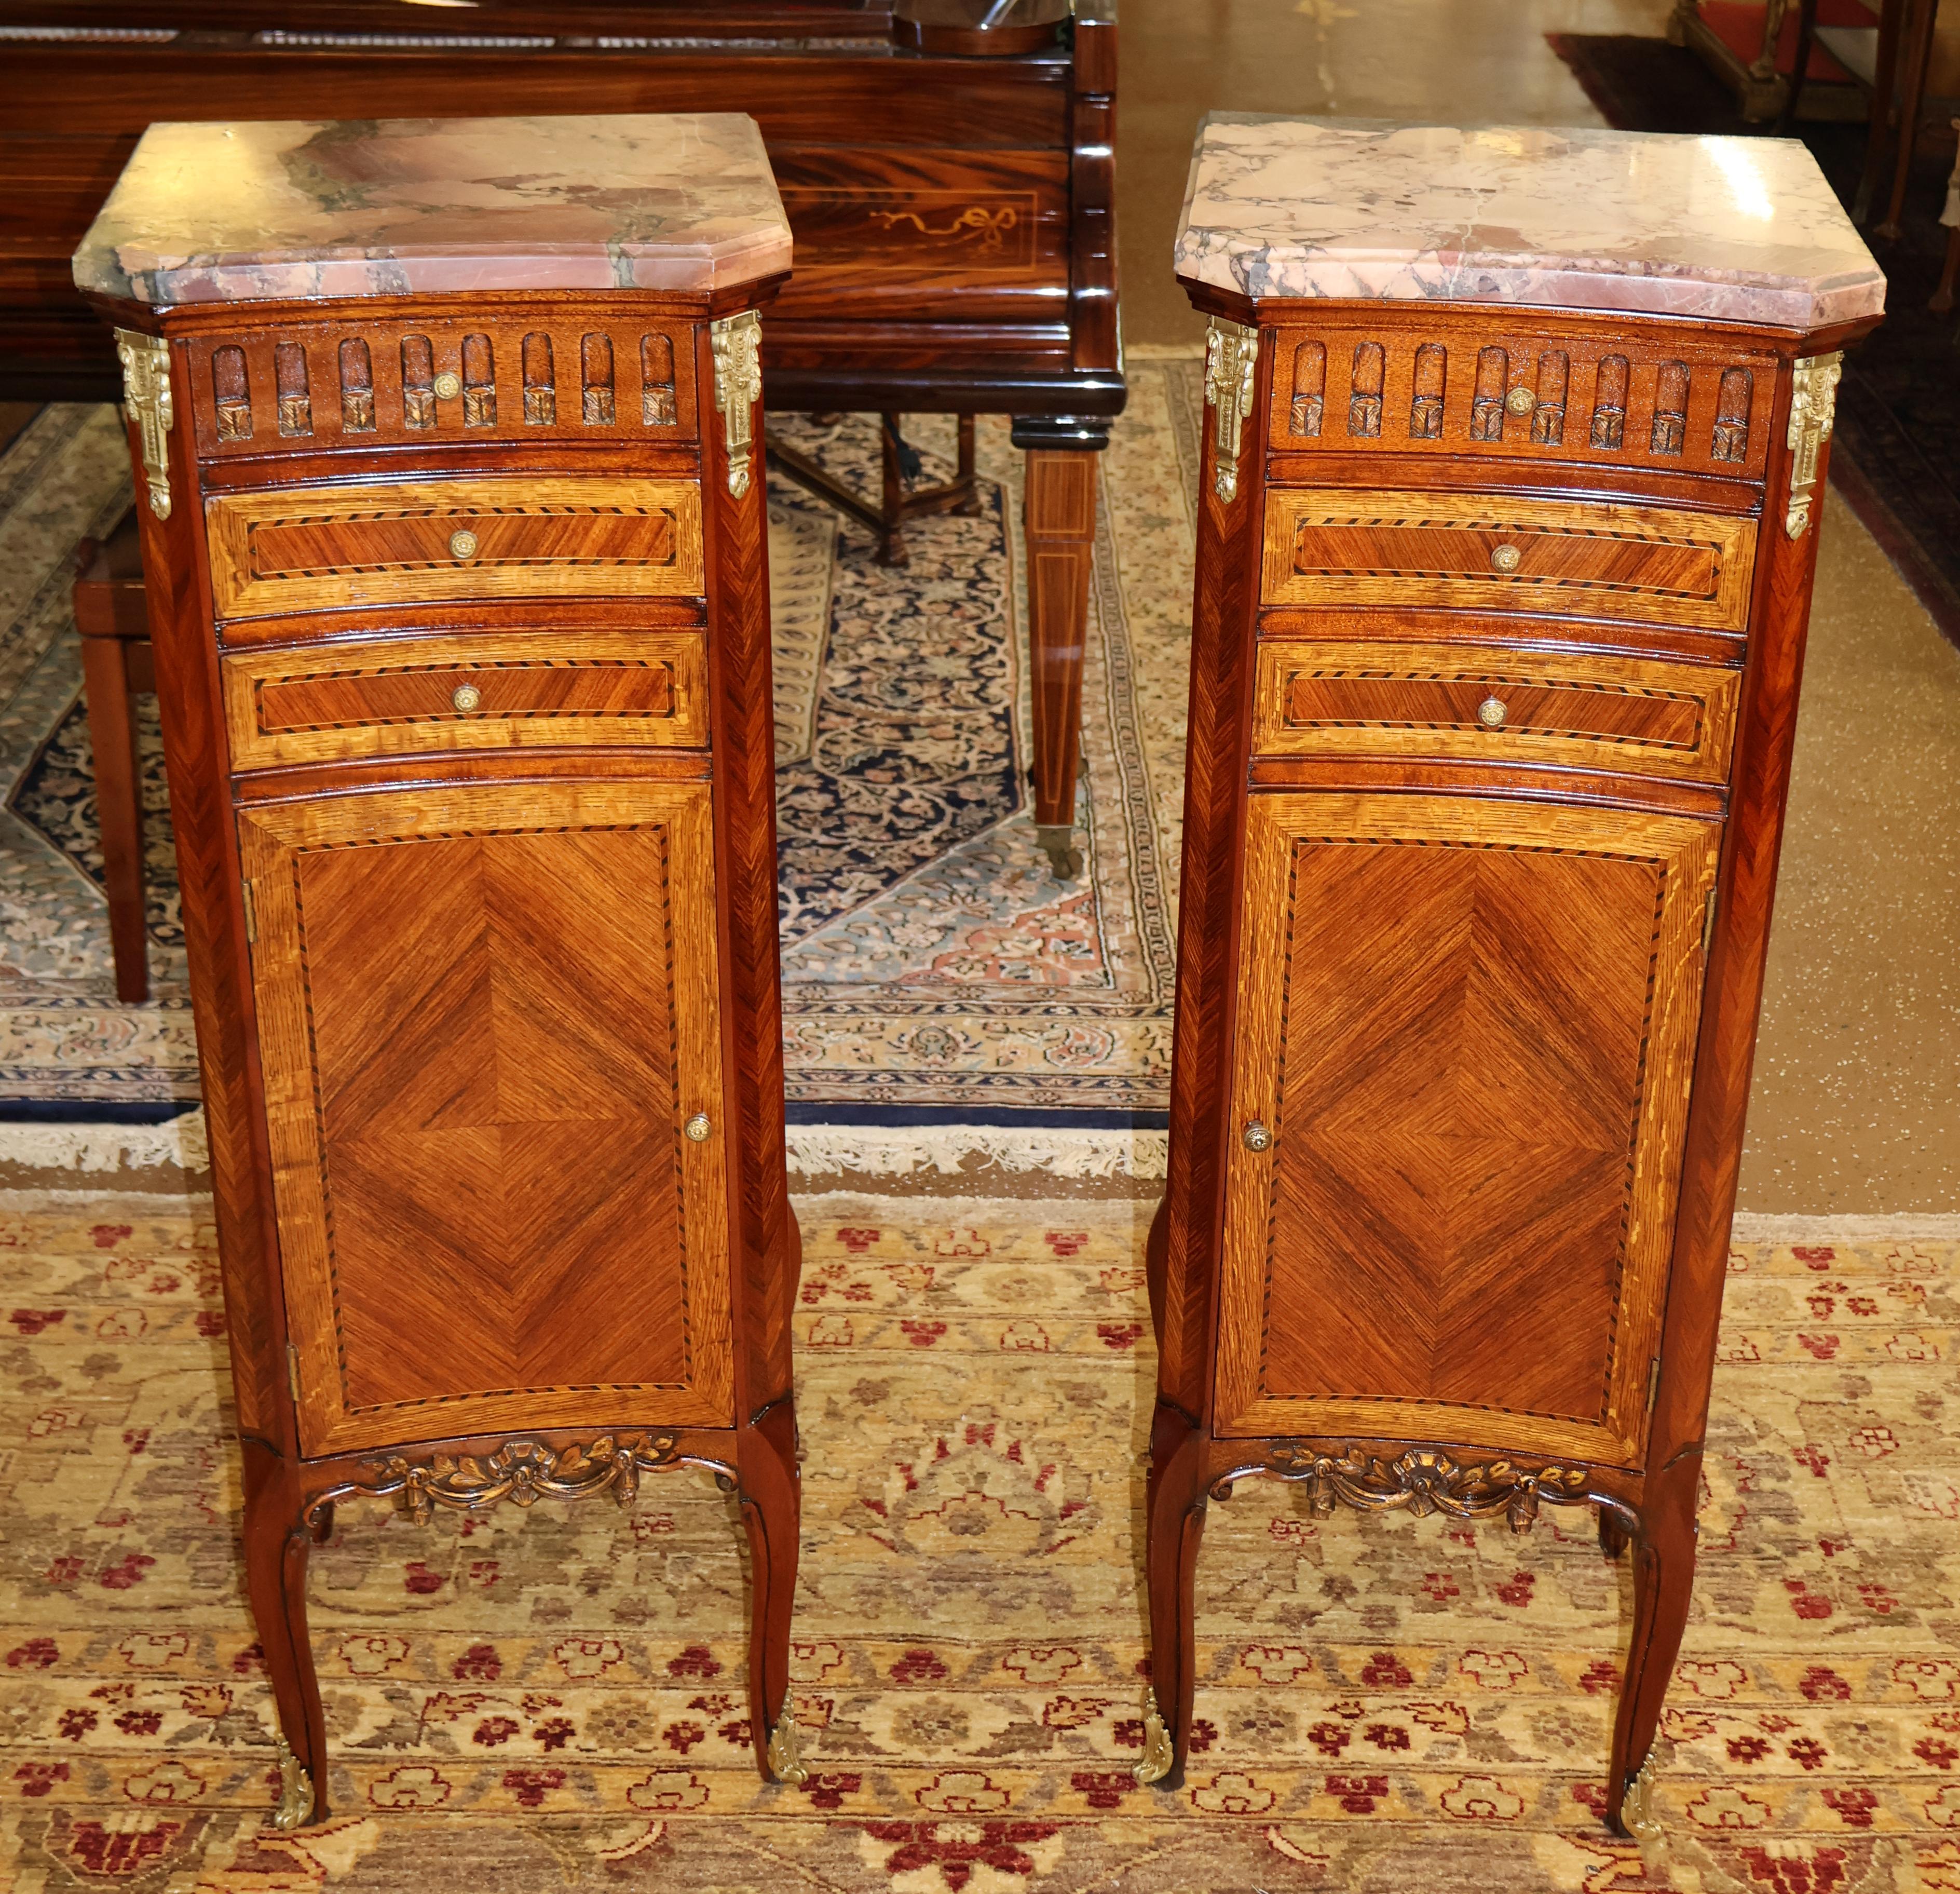 Pair of French Louis XV Style Semainier Lingerie Chest Tall Night Stands

Dimensions : 43